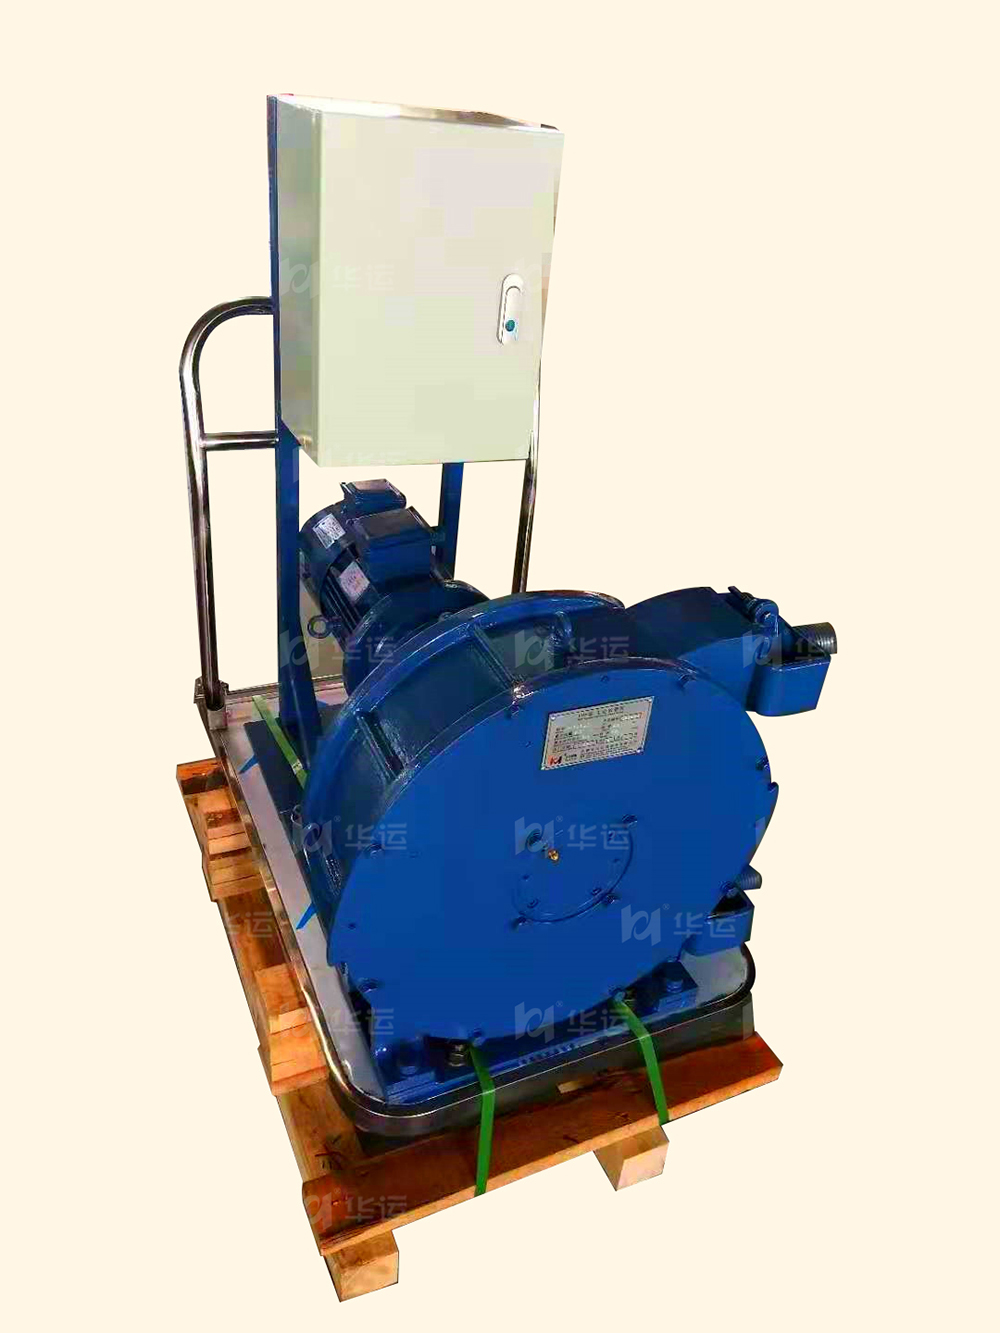 A company purchases several trolley type hose pumps from our company